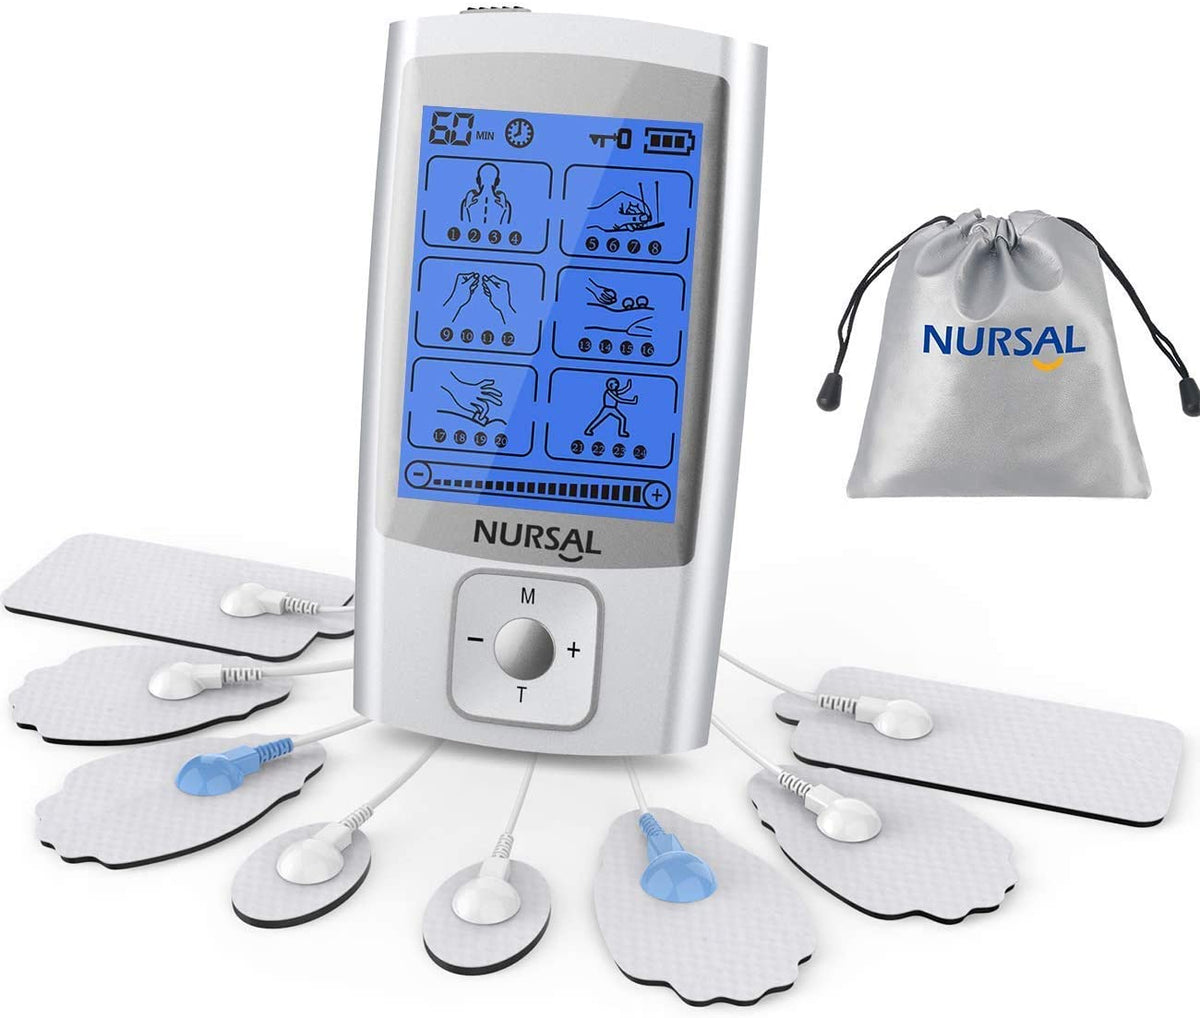 NURSAL TENS Electric Pulse Massager Pain Relief Therapy Muscle Stimulator  (OPEN BOX) EPS04 